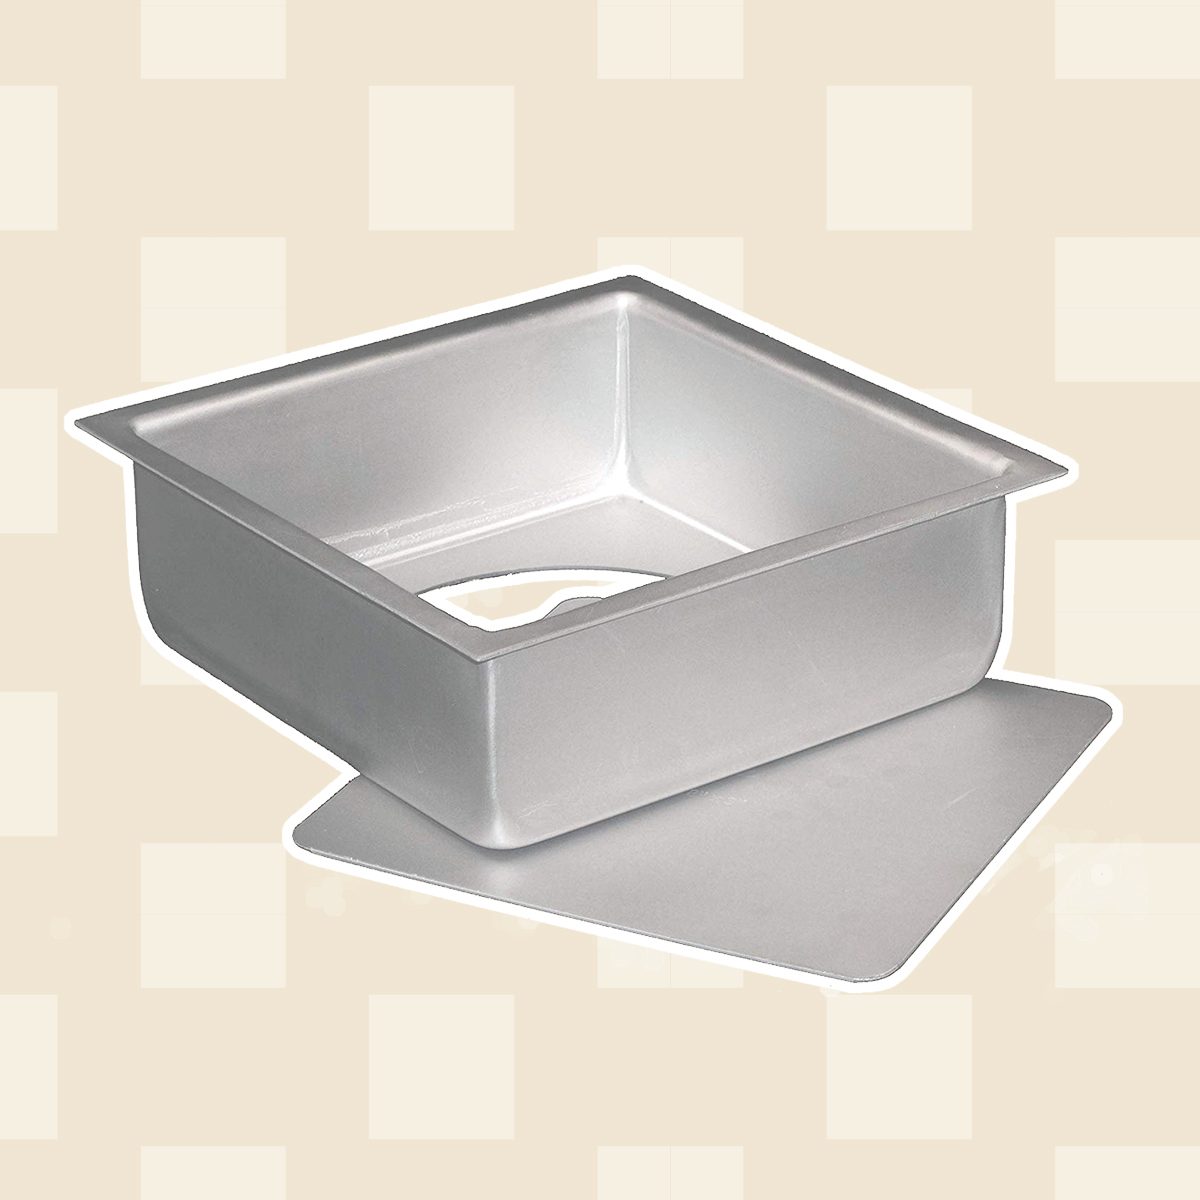 Taste of Home 8 Non-Stick Metal Square Baking Pan, Color: Gray - JCPenney